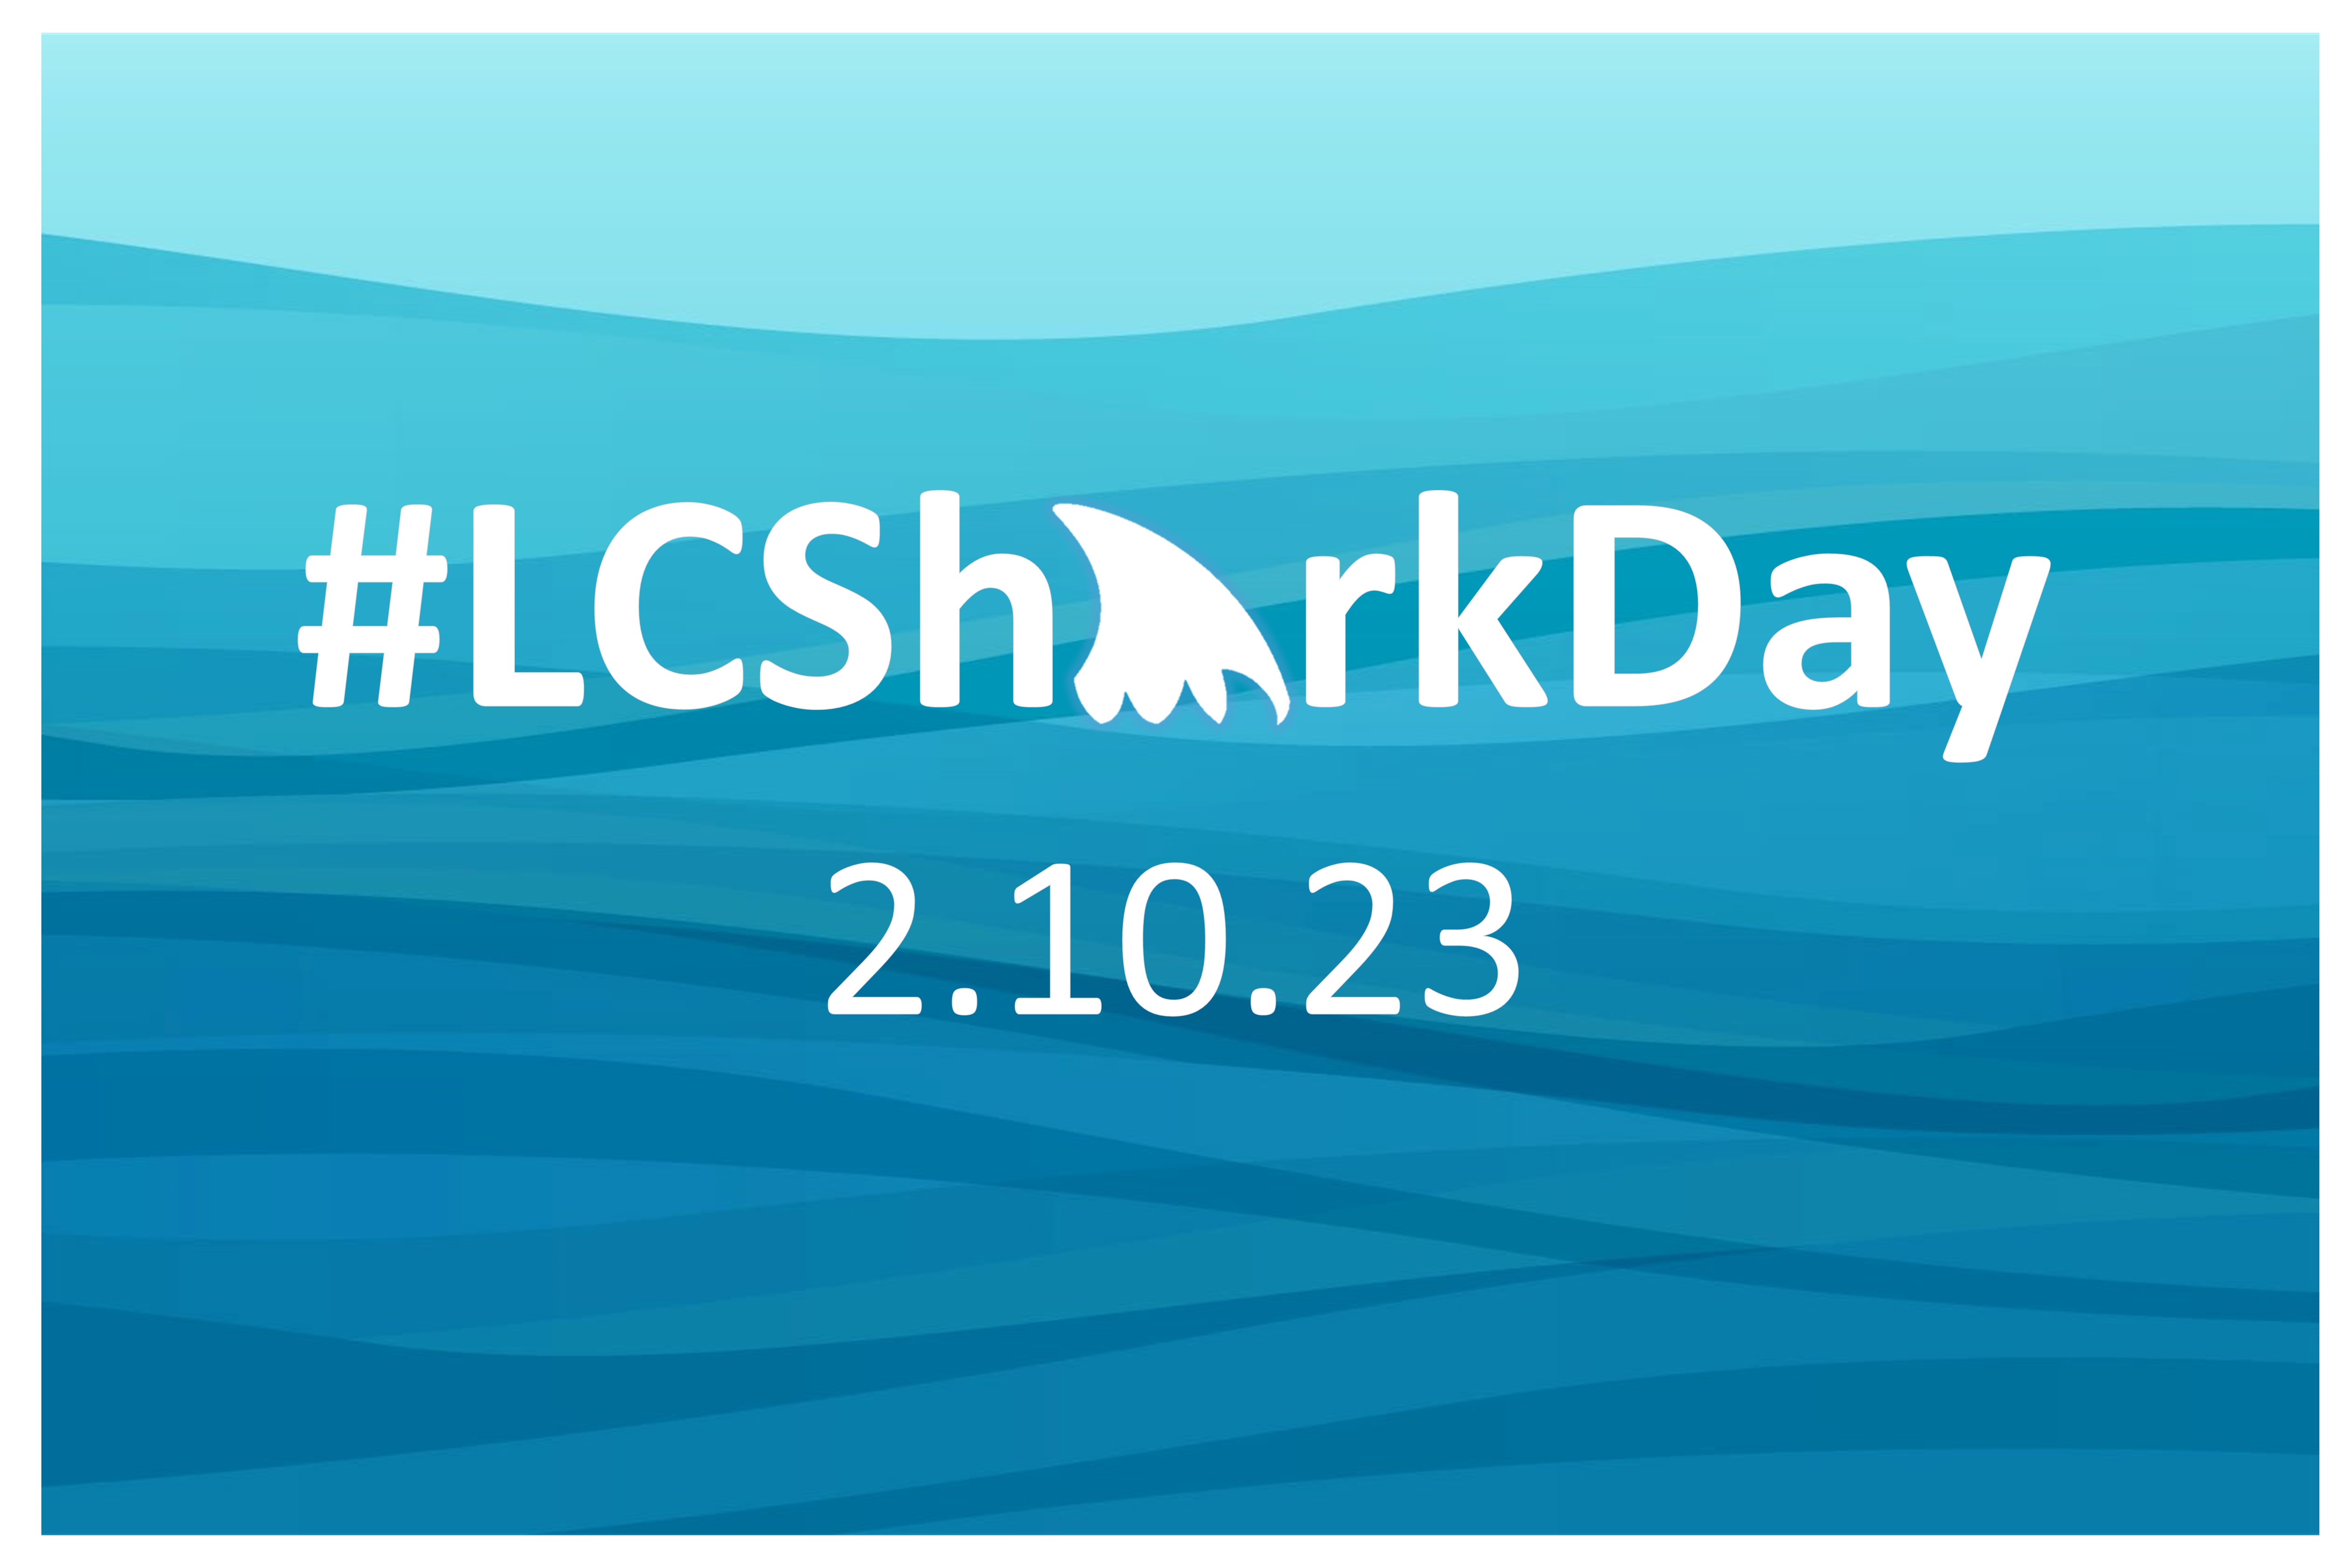 Graphic of blue waves with the words LC Shark Day and date of February 10, 2023. The A in Shark is a dorsal fin.